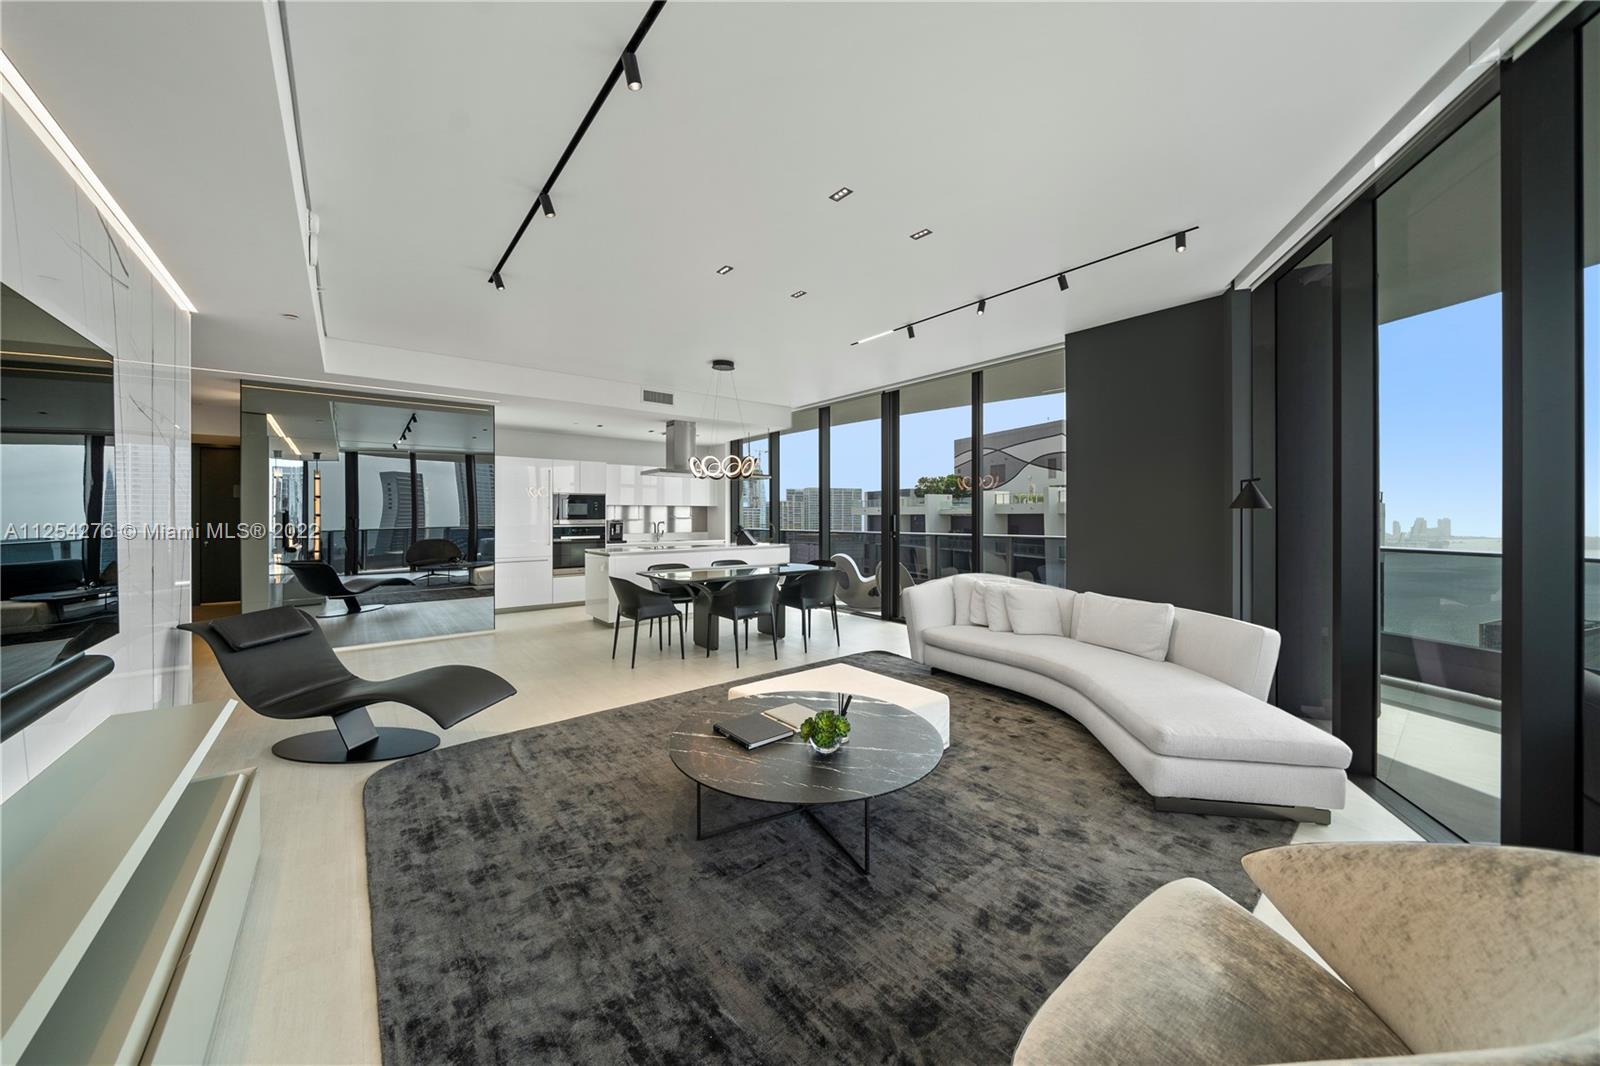 Amazing Penthouse level unit at Flat Iron @ Brickell. Professional decorated by awarded architect (fully furnished). 3 bedrooms, 3.5 bathrooms, den was converted to a walk in closet for master bedroom.